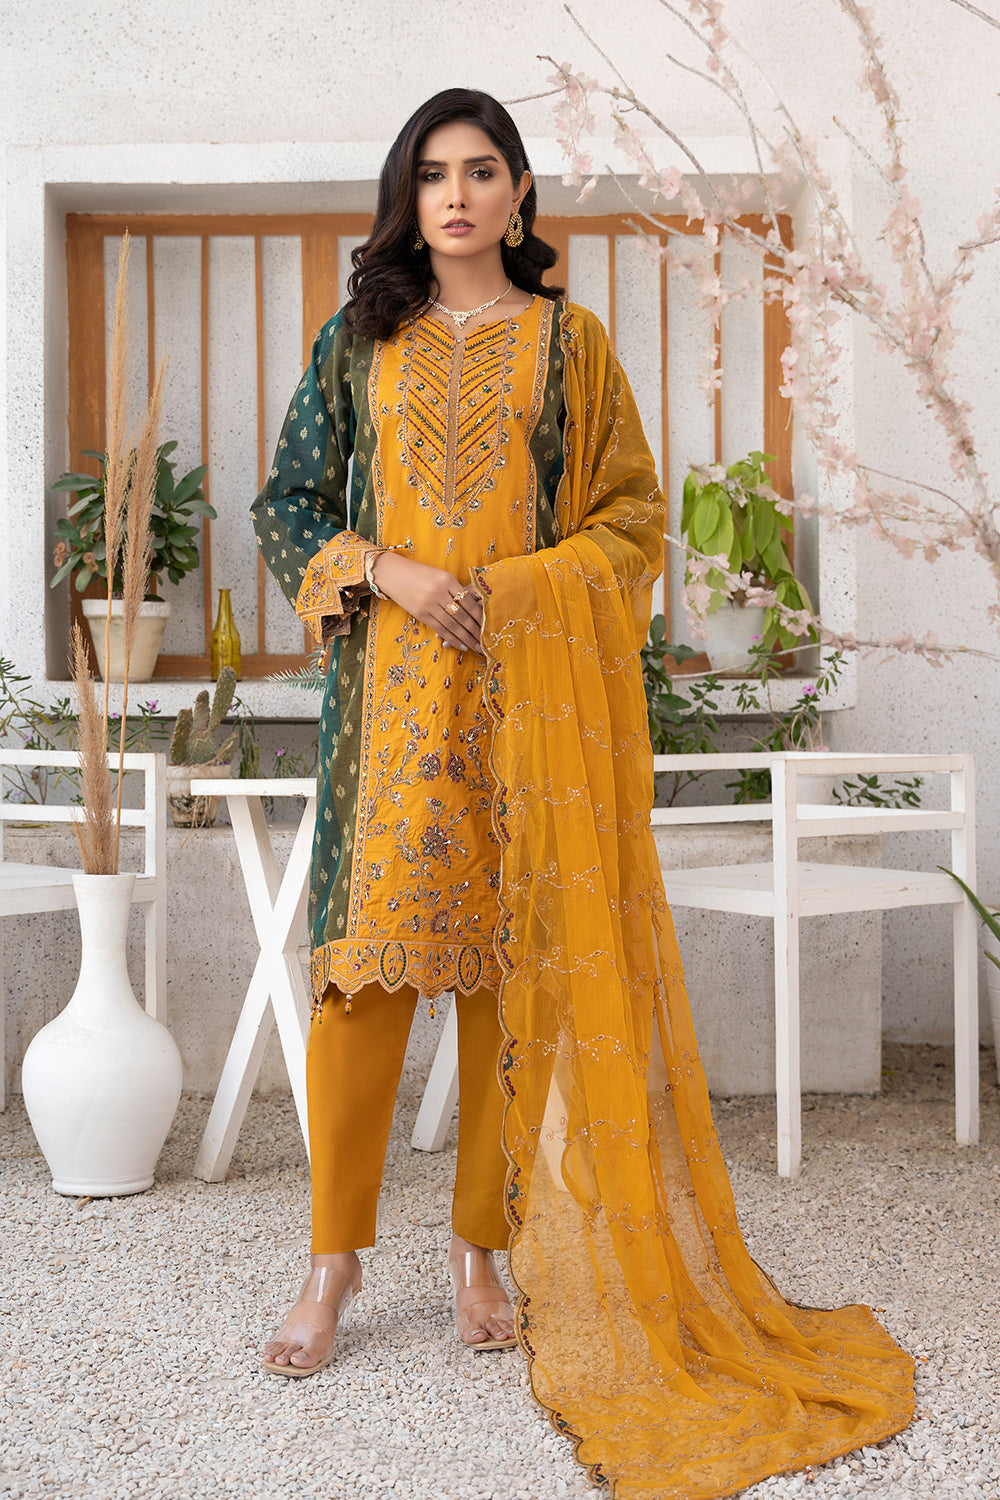 ROYAL JASMINE 3pc-Unsticthed Cotton Embroidered Suit